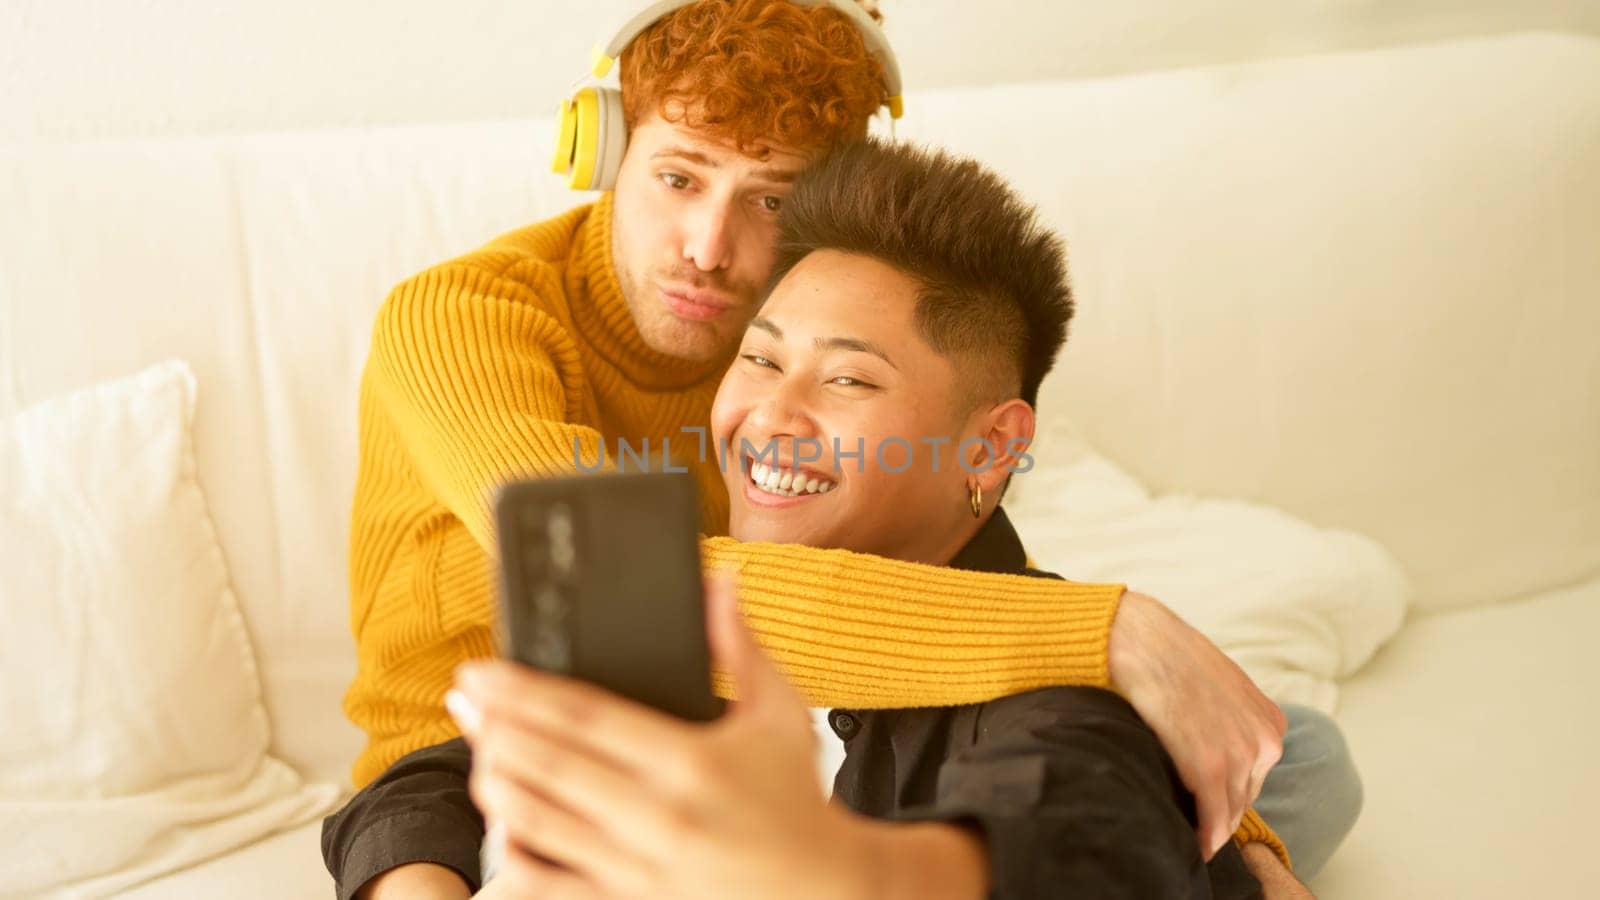 Gay couple embracing and smiling while taking selfie together by ivanmoreno